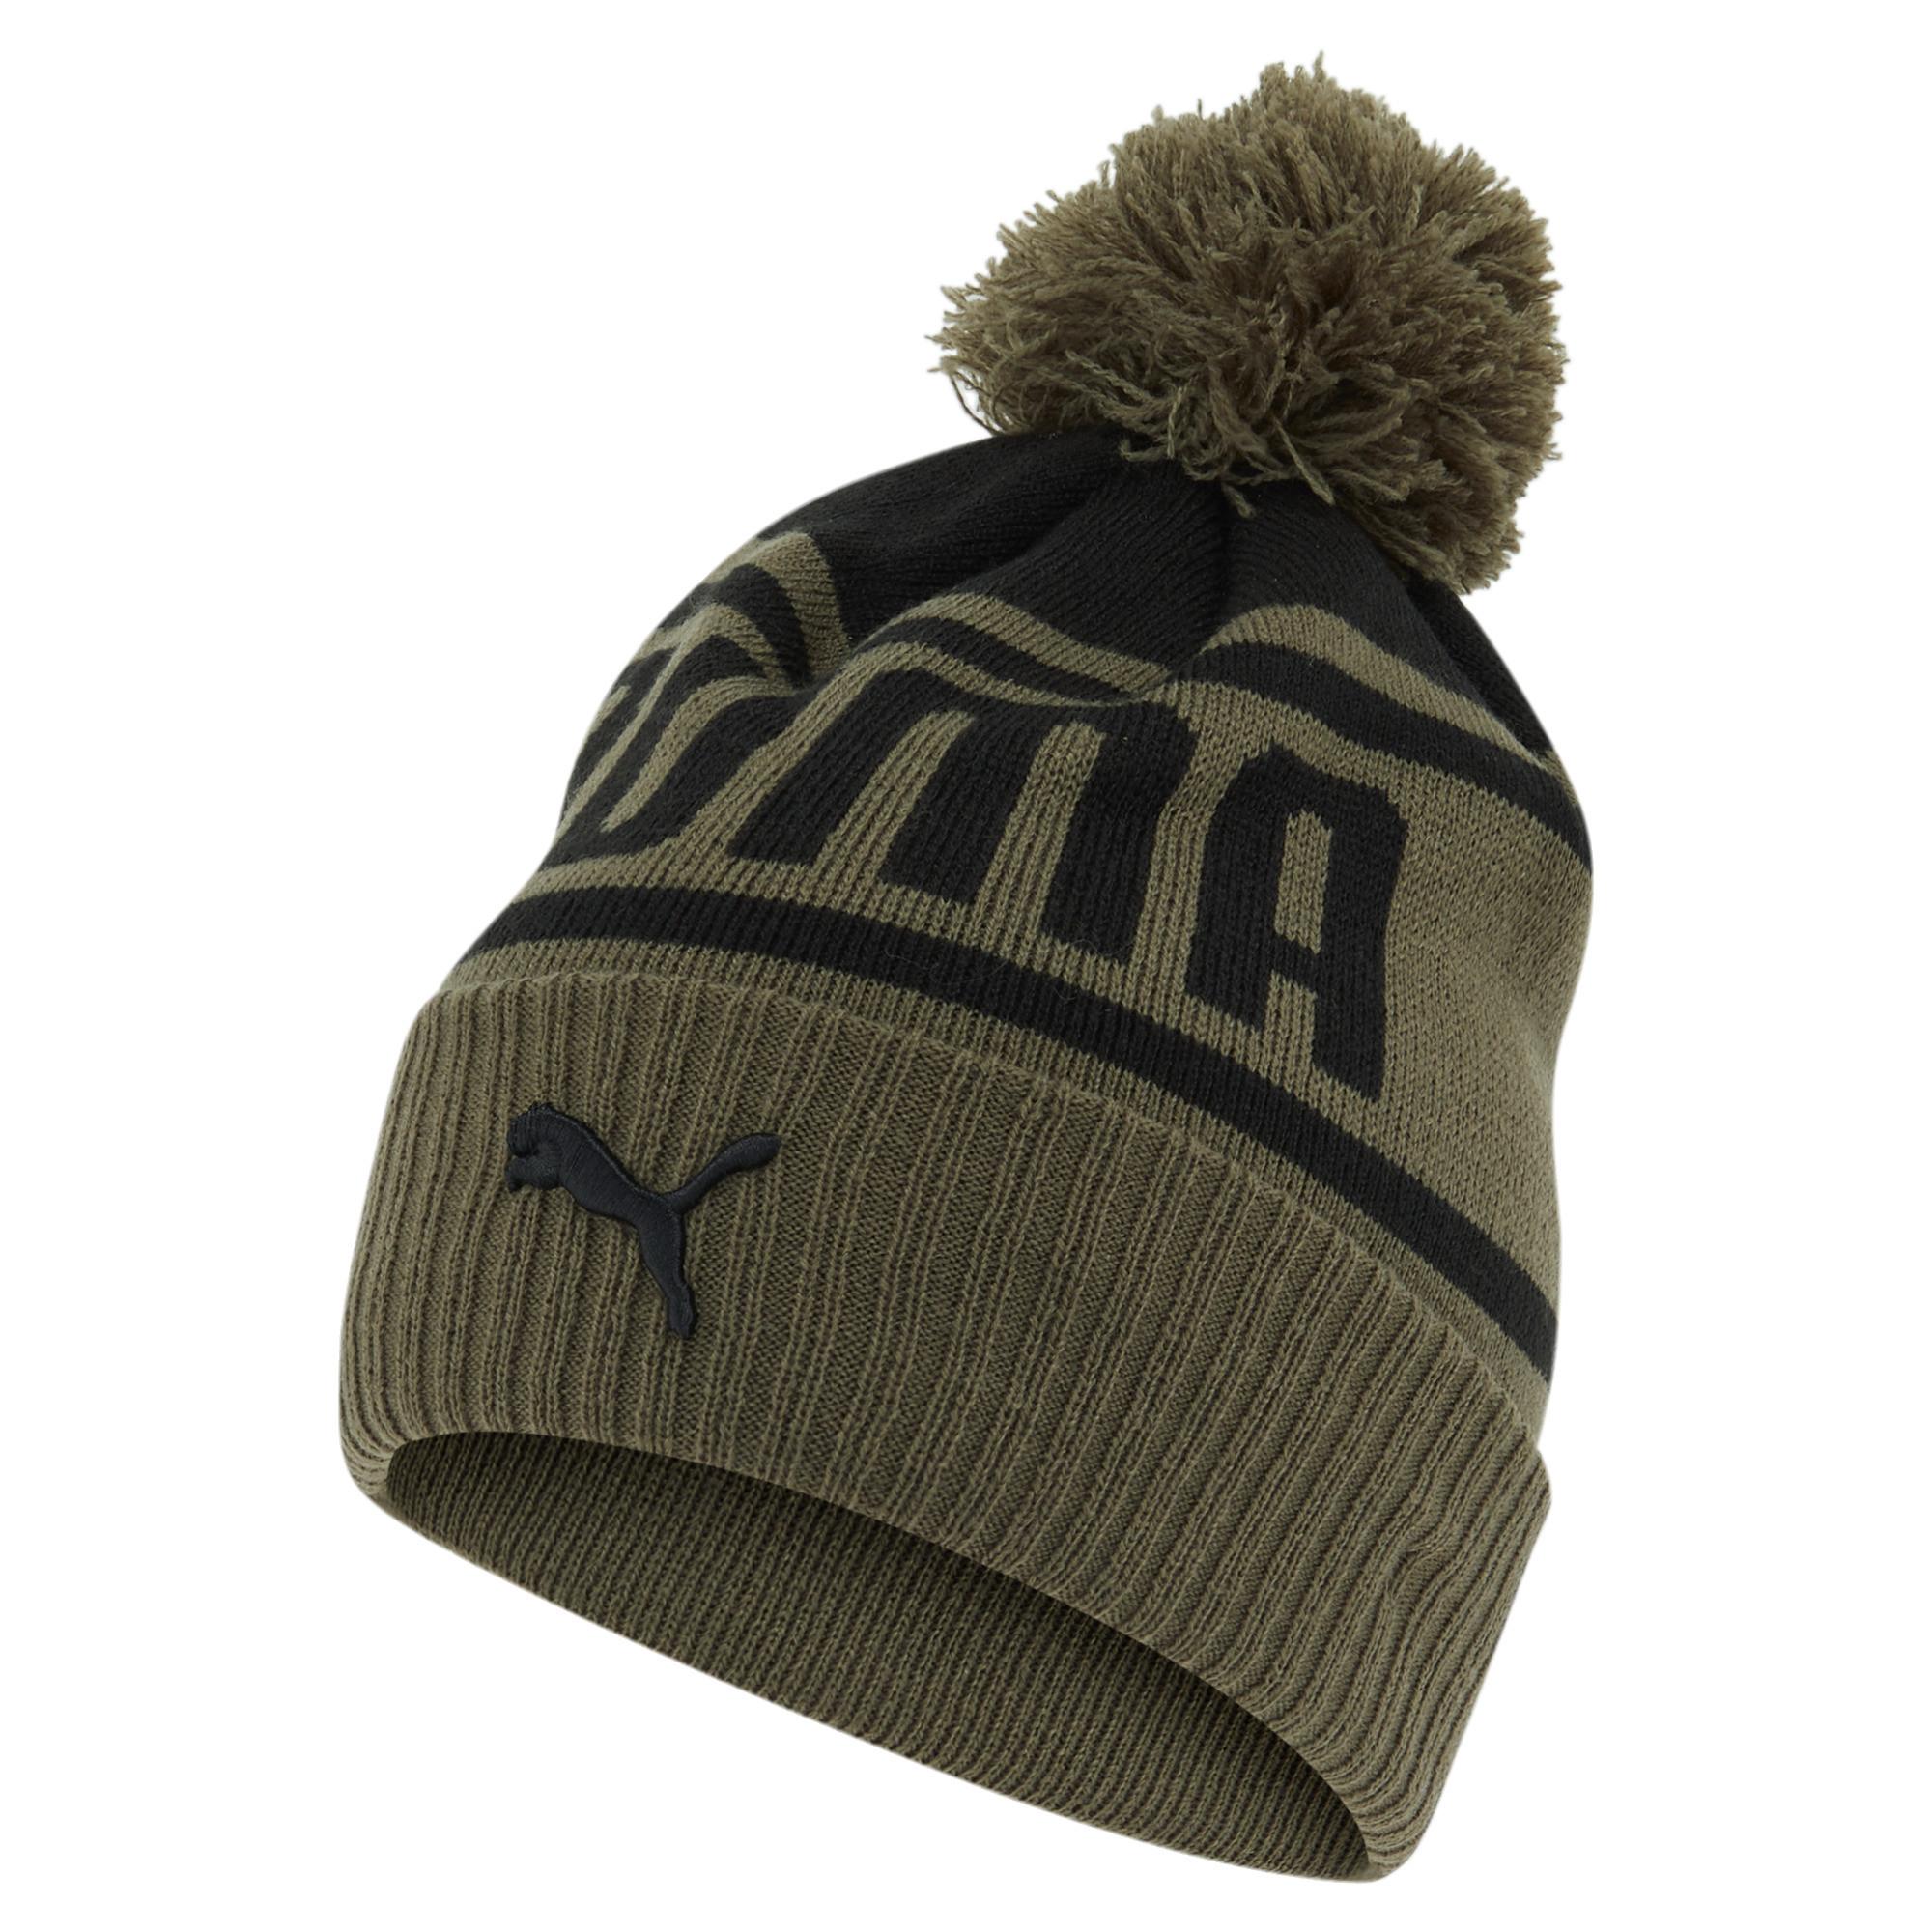 PUMA Frost Cuff Pom Beanie Hat in Olive / Black (Green) for Men - Lyst